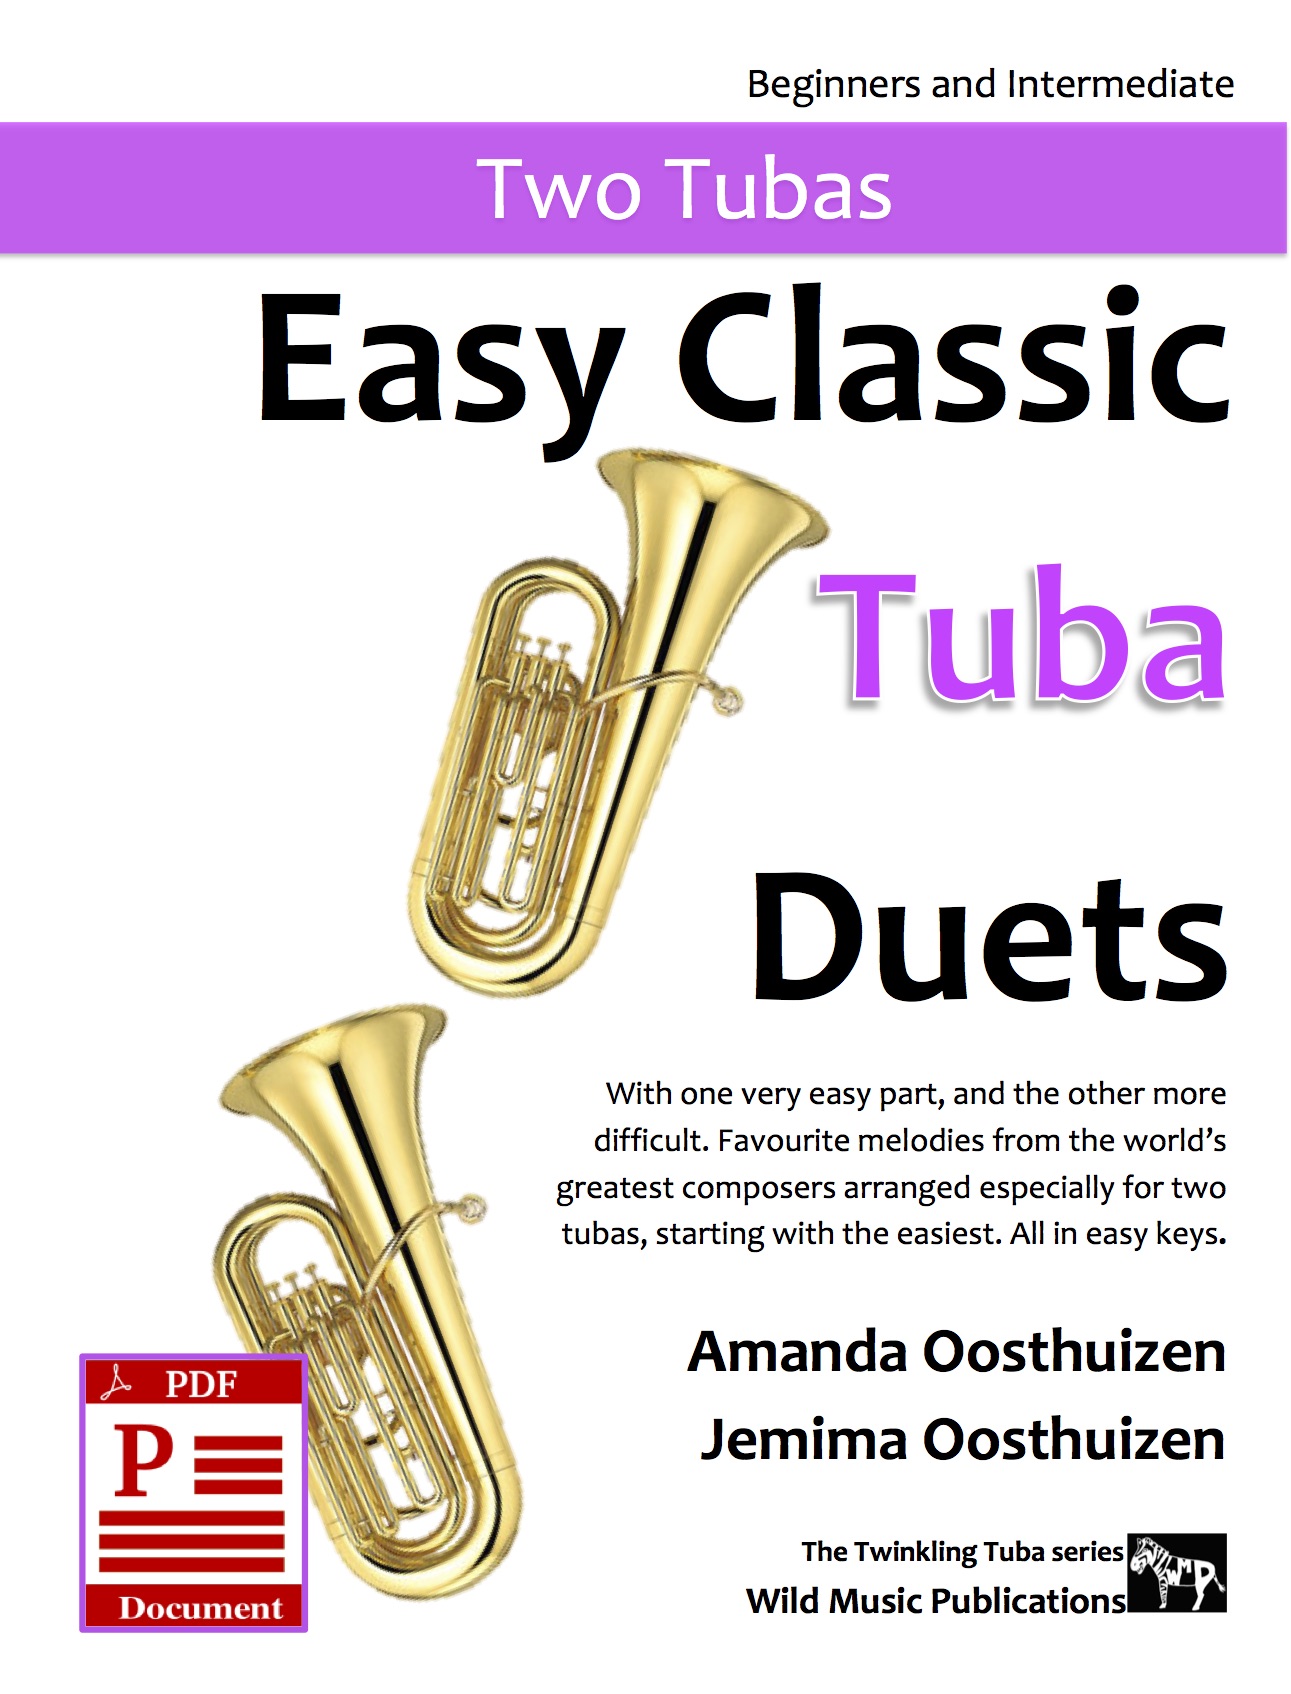 All in easy keys. starting with the easiest Easy Classic French Horn Duets: With one very easy part Comprises favourite melodies from the world’s greatest .. and the other more difficult 